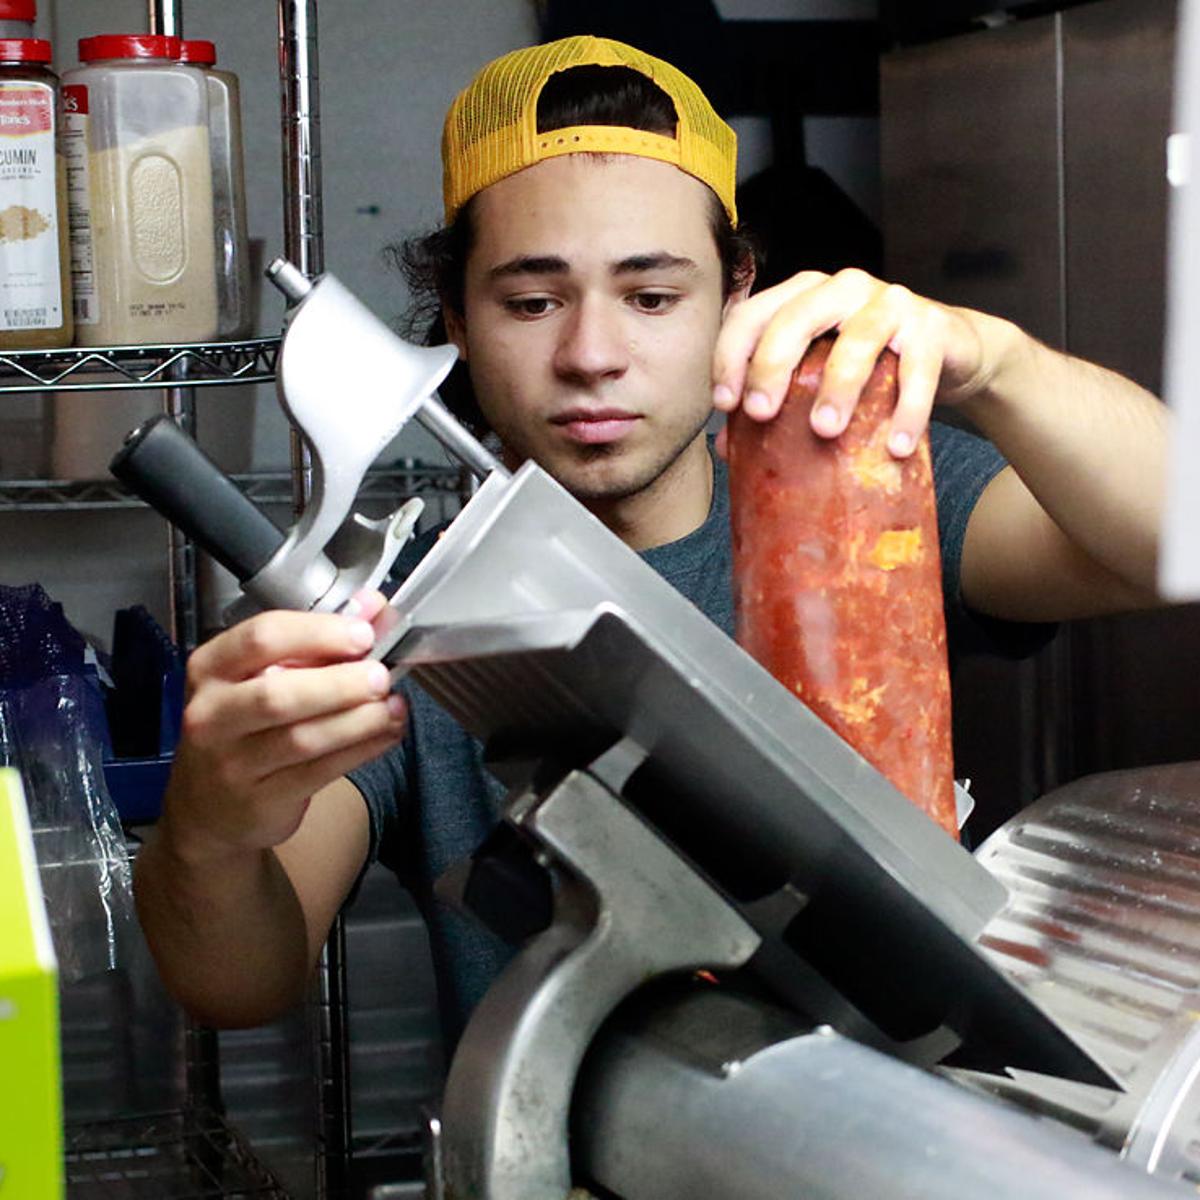 PHOTO GALLERY: Lee Street Deli prepares for lunch rush | Photos |  